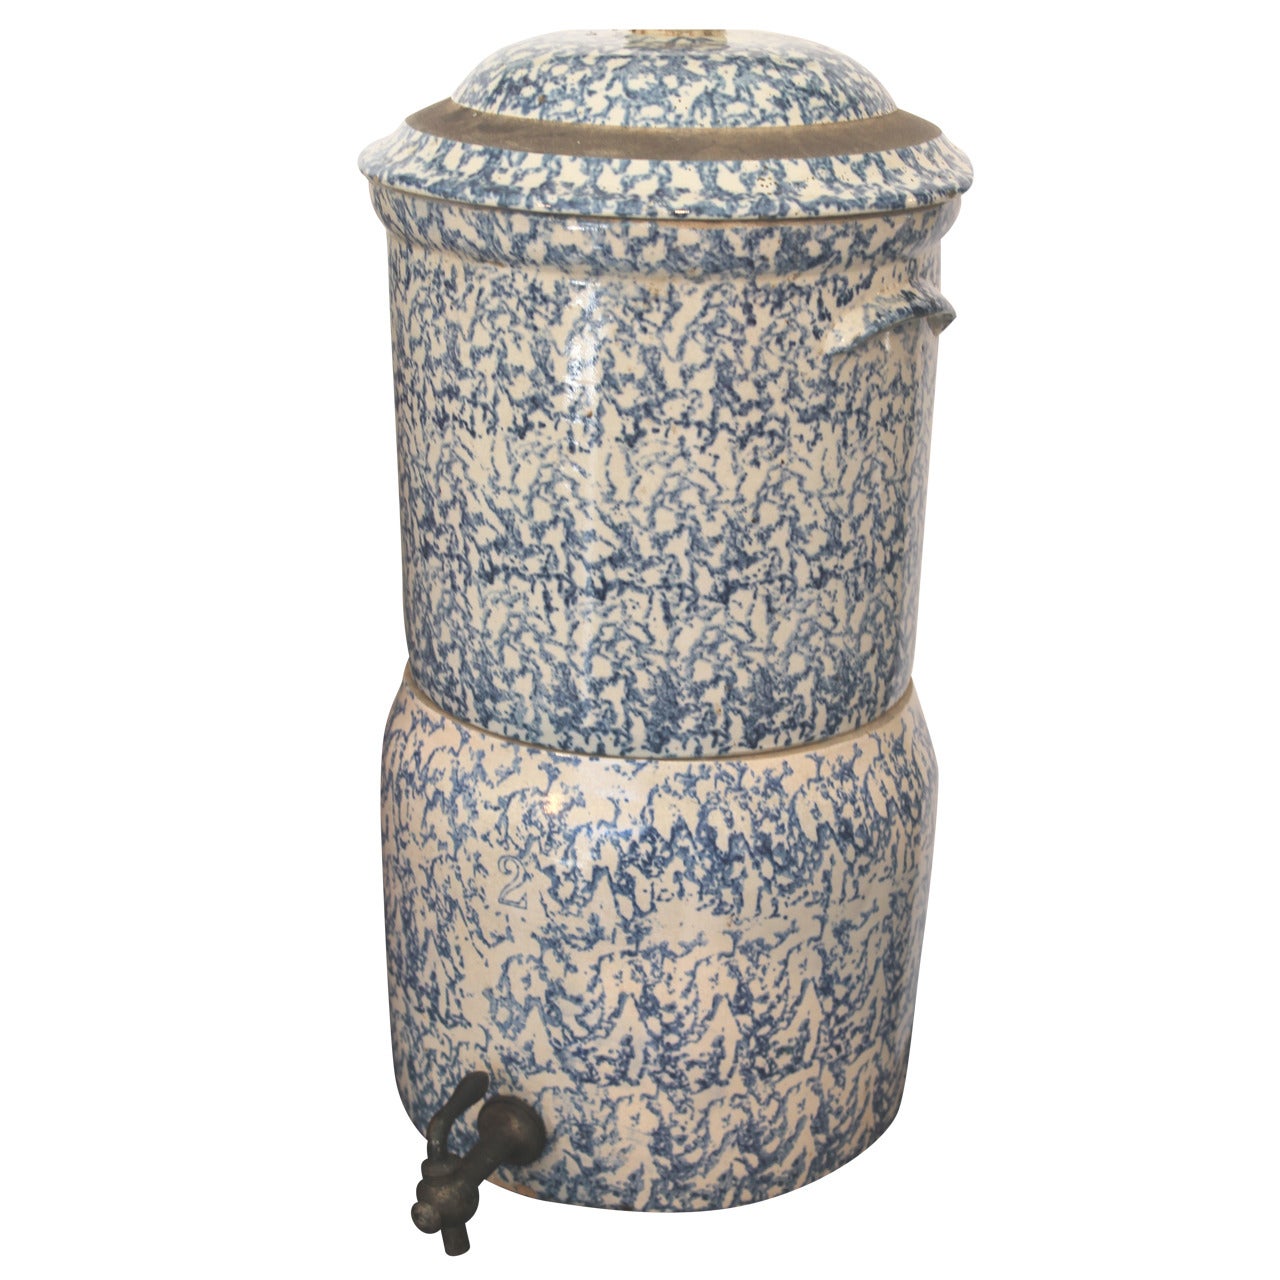 Rare 19th Century Two-Piece Sponge Ware Water Cooler For Sale